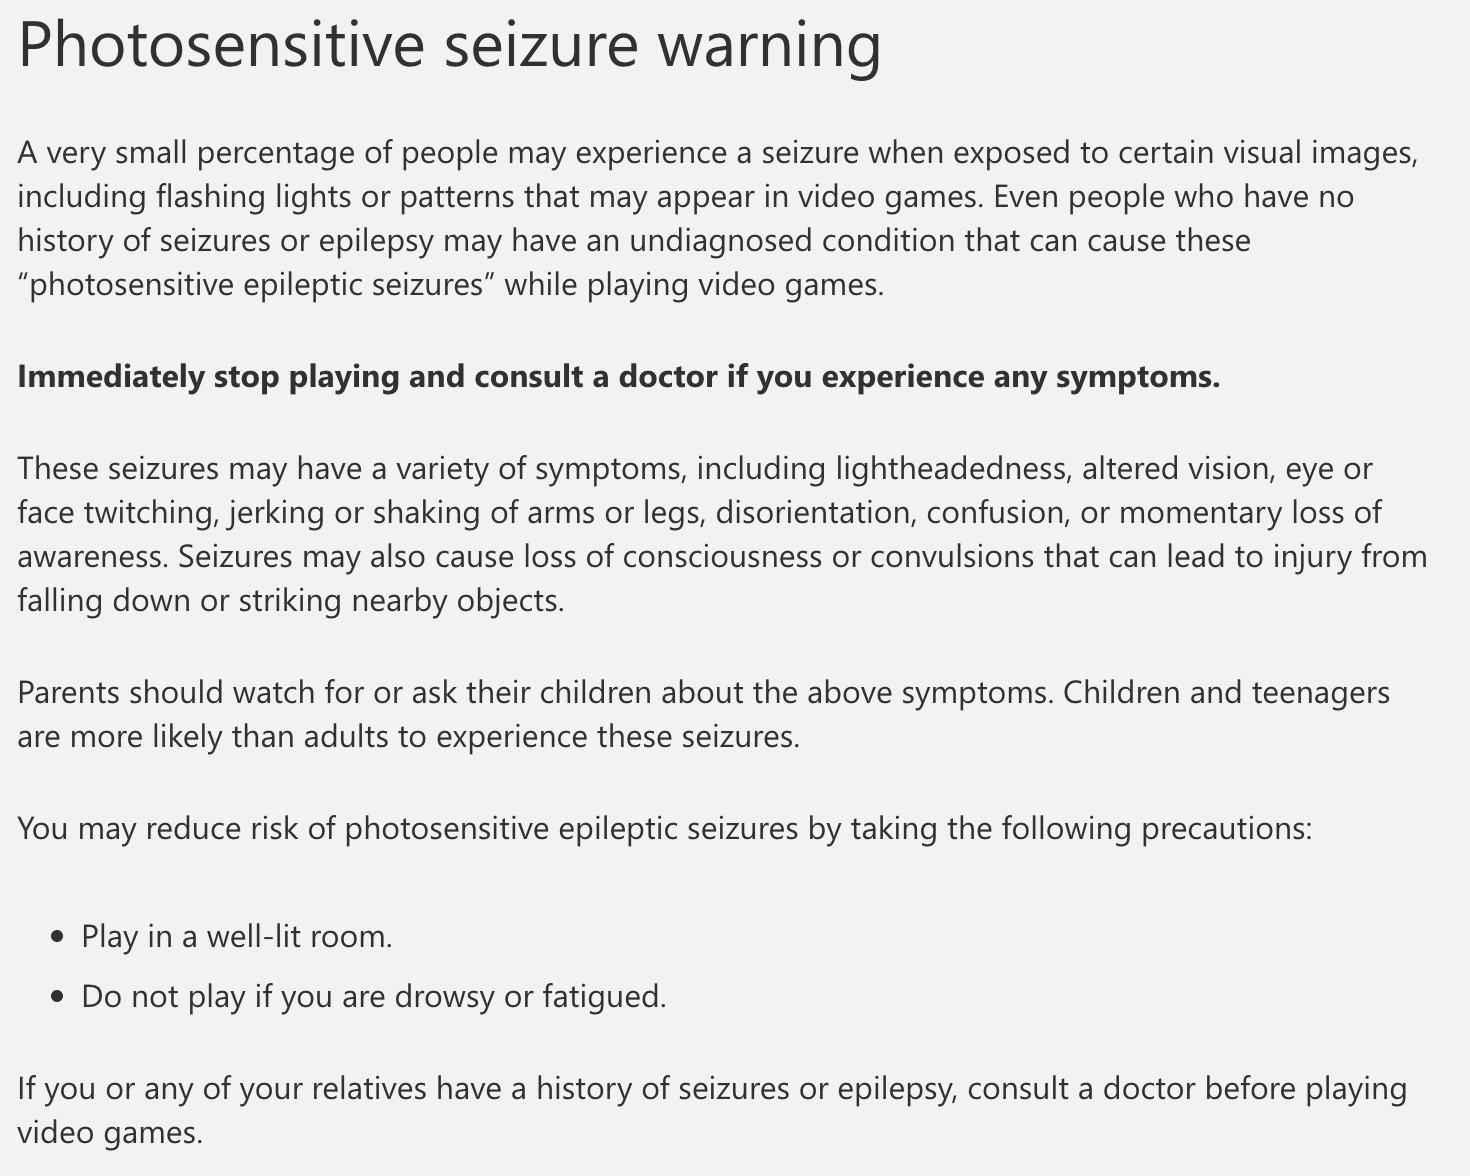 A photosensitive seizure warning for XBox. It includes an explanation of what photosensitive seizures are and instructs users to stop playing immediately and see a doctor if they experience symptoms.